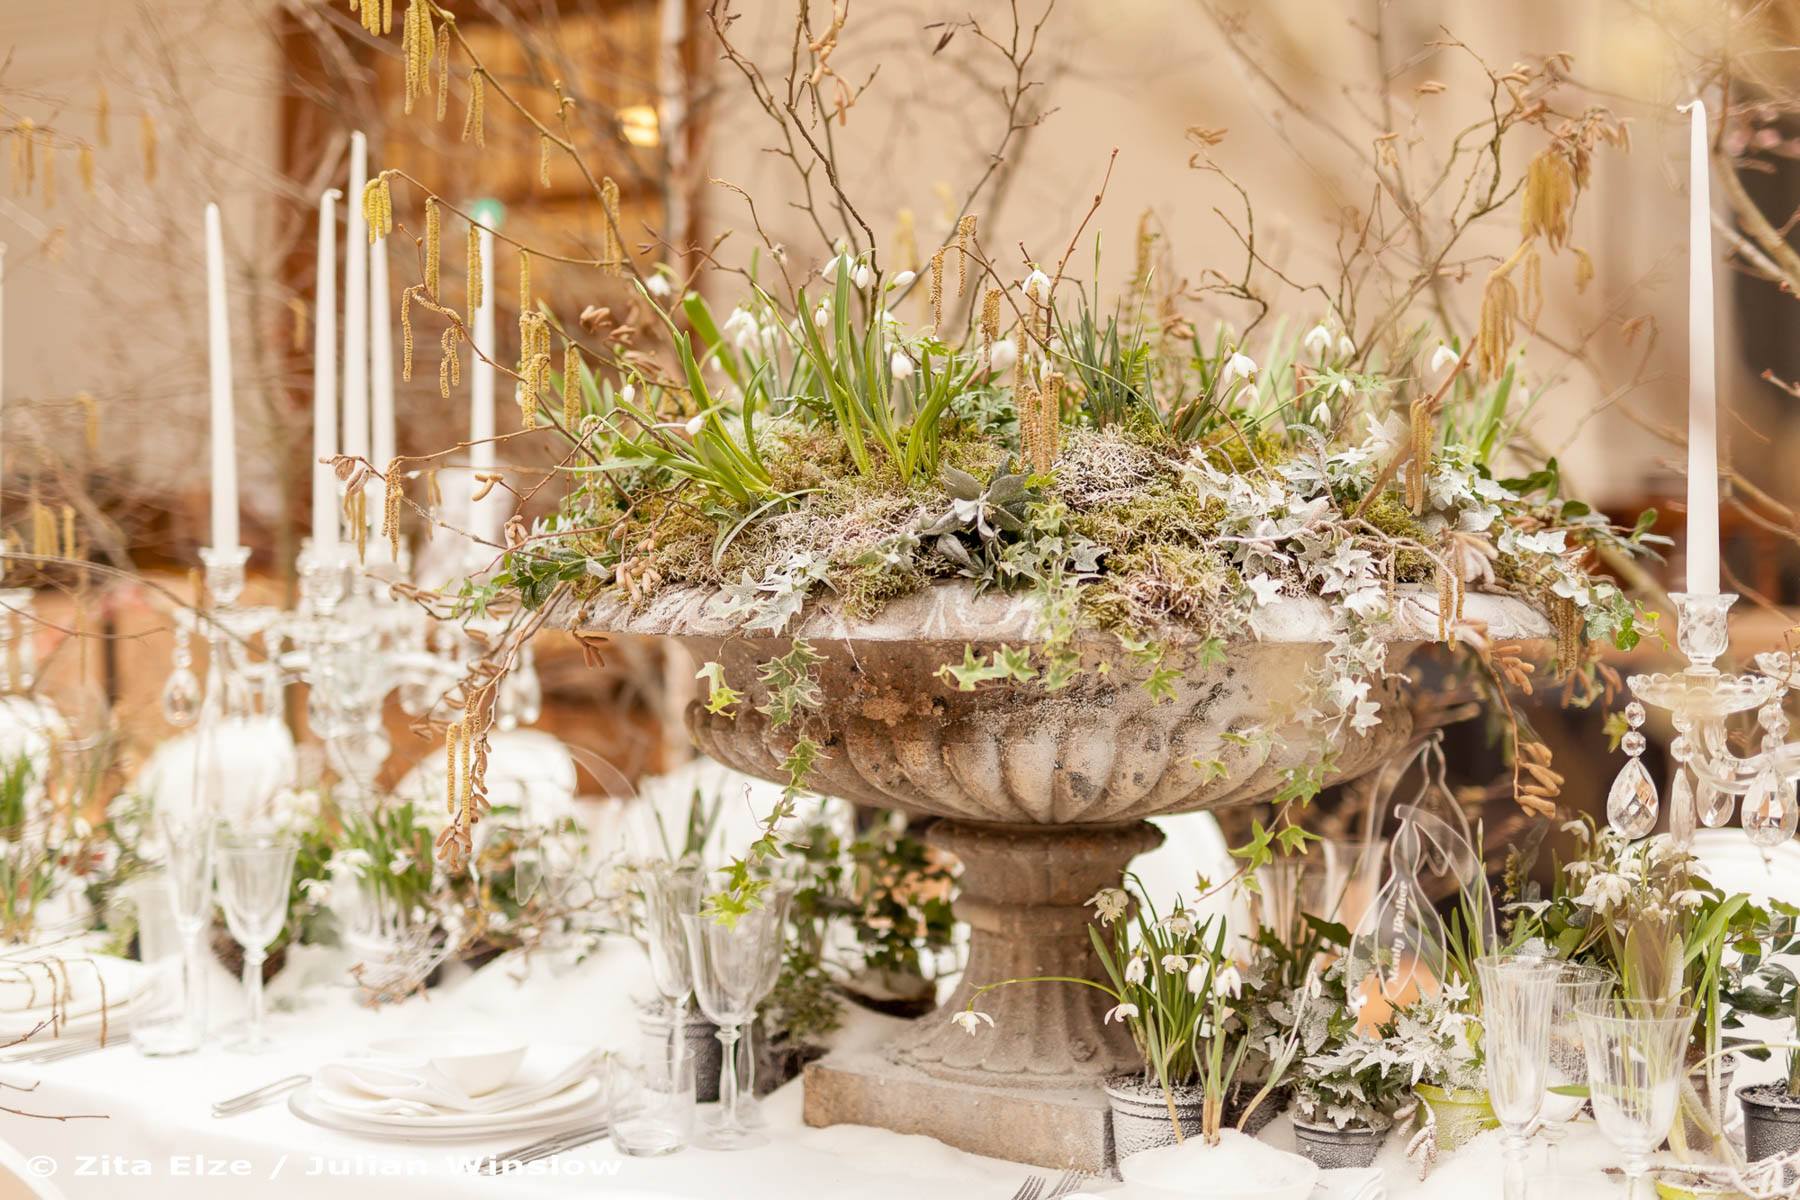 detail of set up of a dining table with flowers and a centrepiece